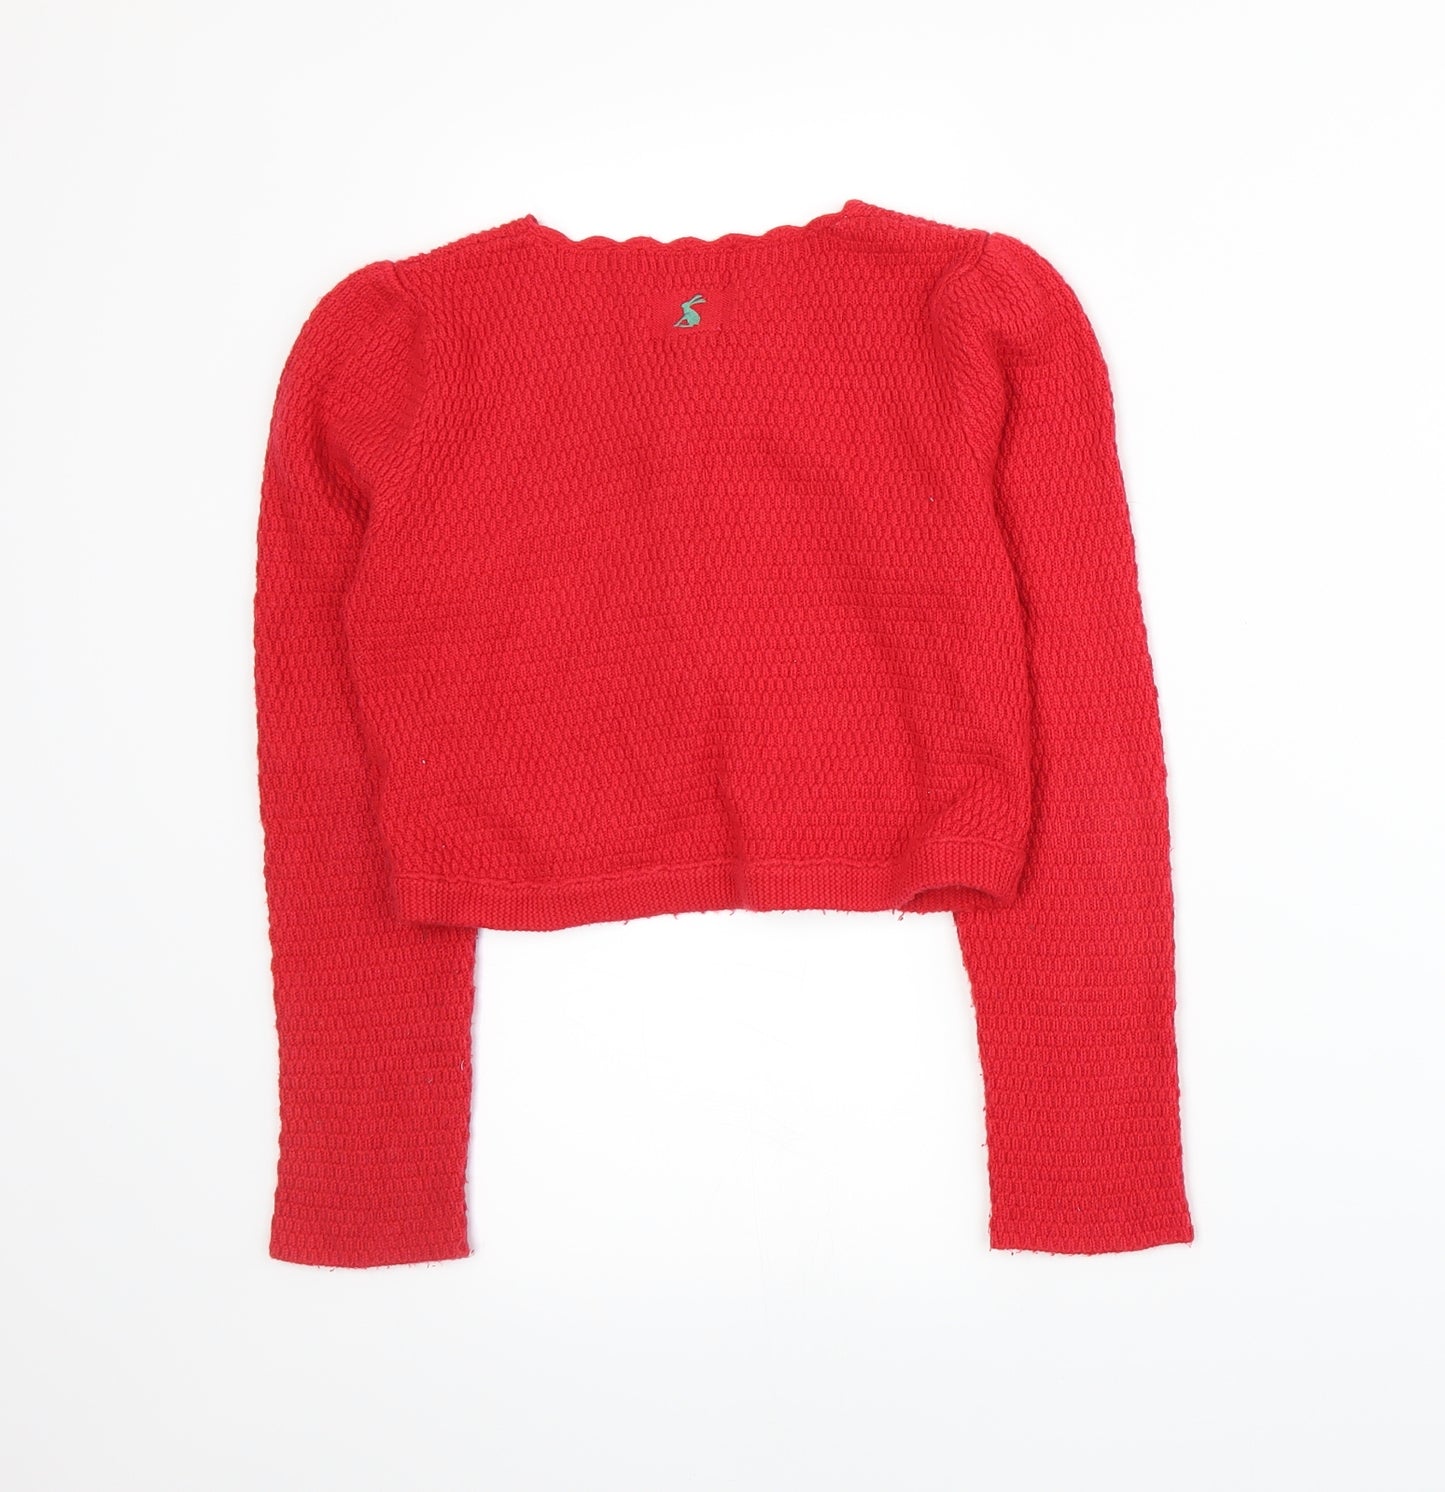 Joules Girls Red  Knit Cardigan Jumper Size 9-10 Years